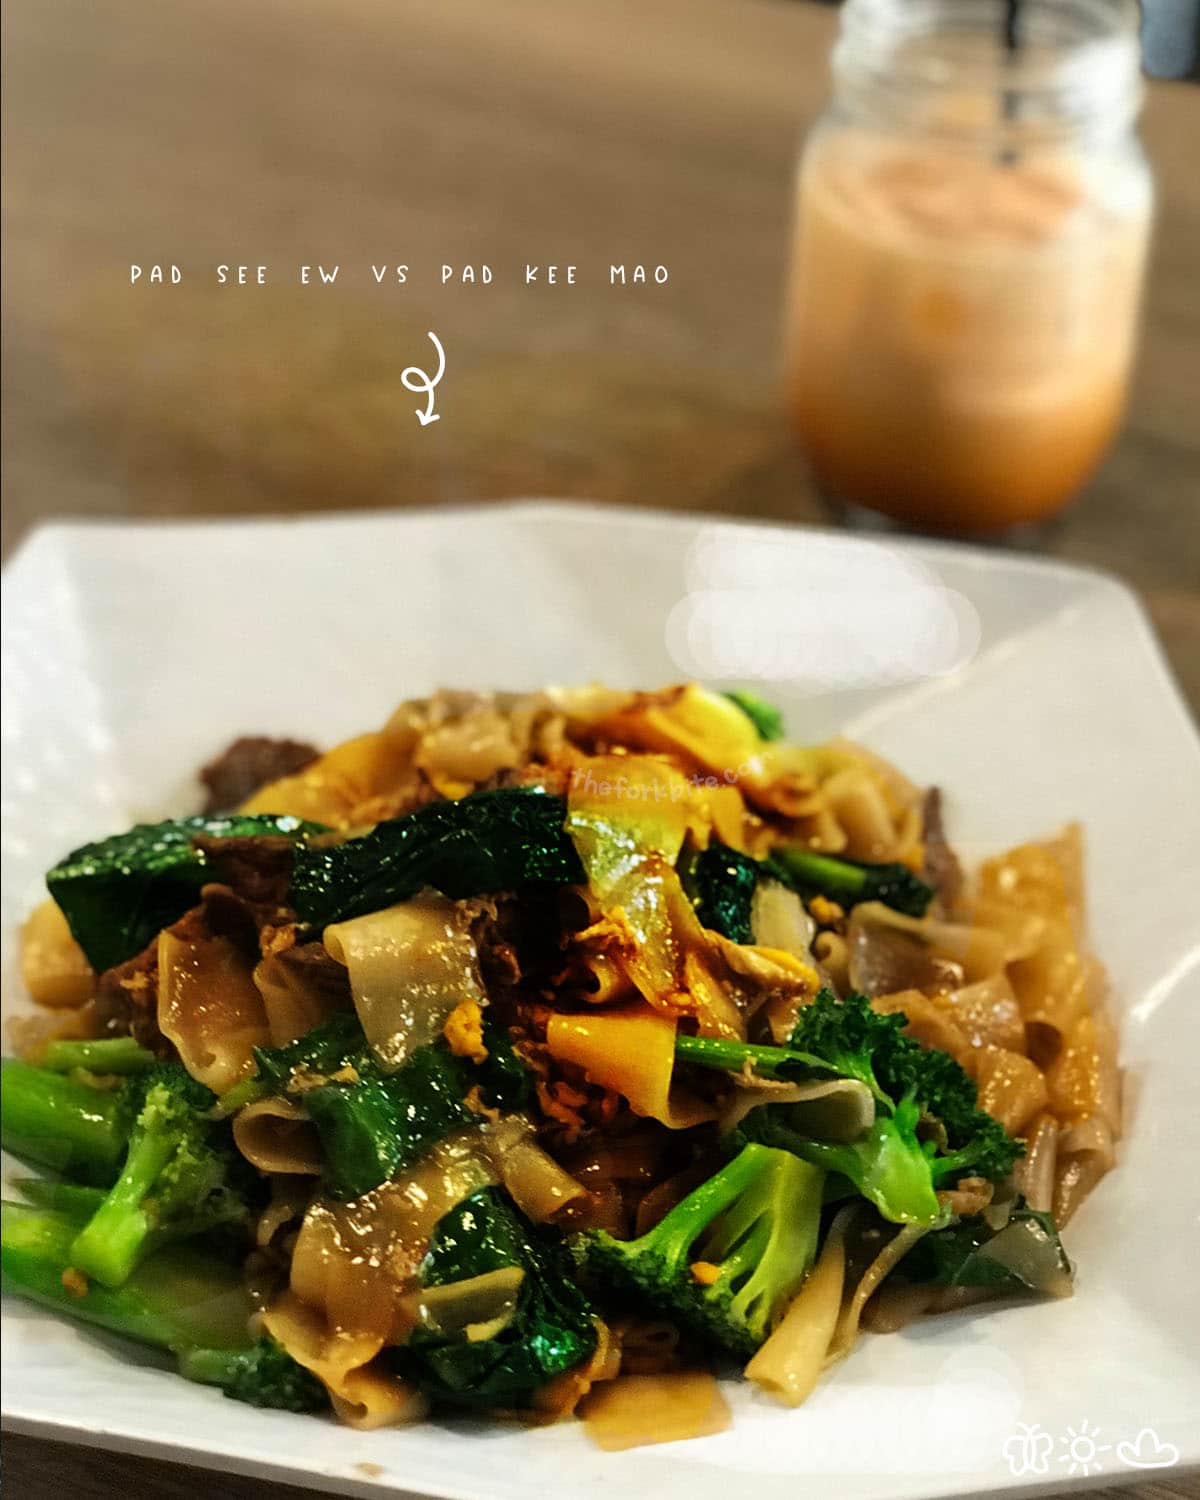 Are you a fan of Thai food? If so, you've probably tried both pad see ew and pad kee mao. But which one is better?